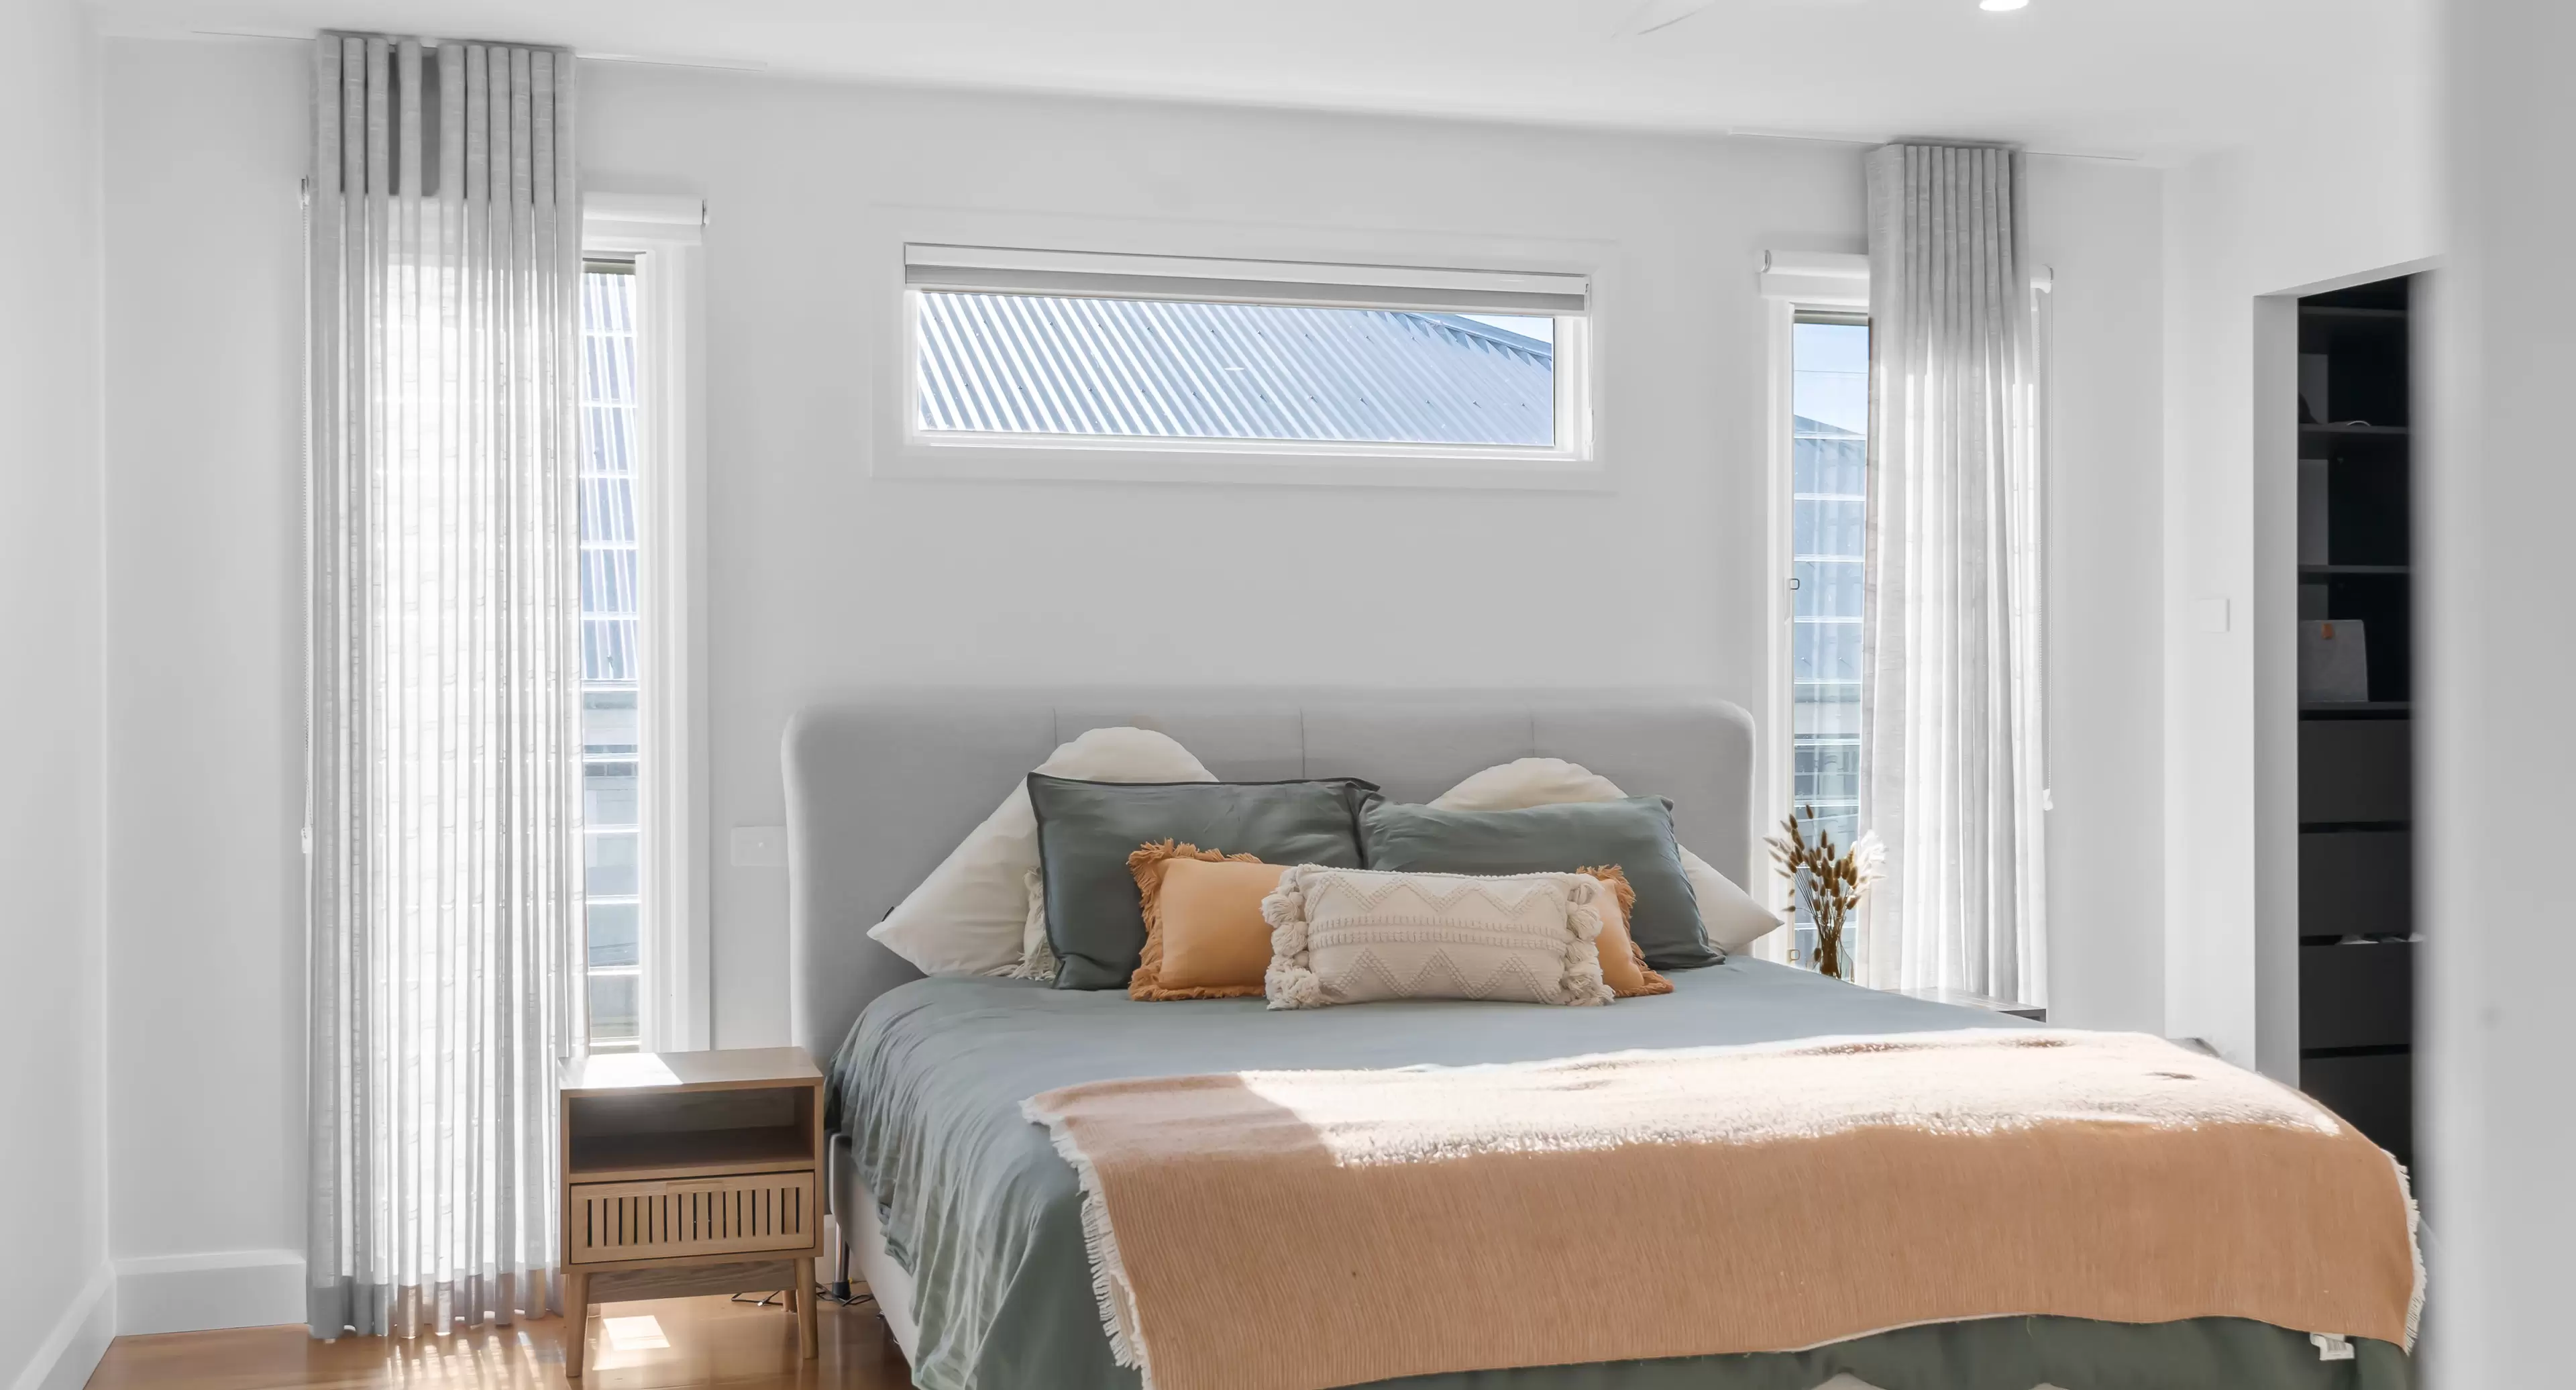 Master Bedroom with a highlight window